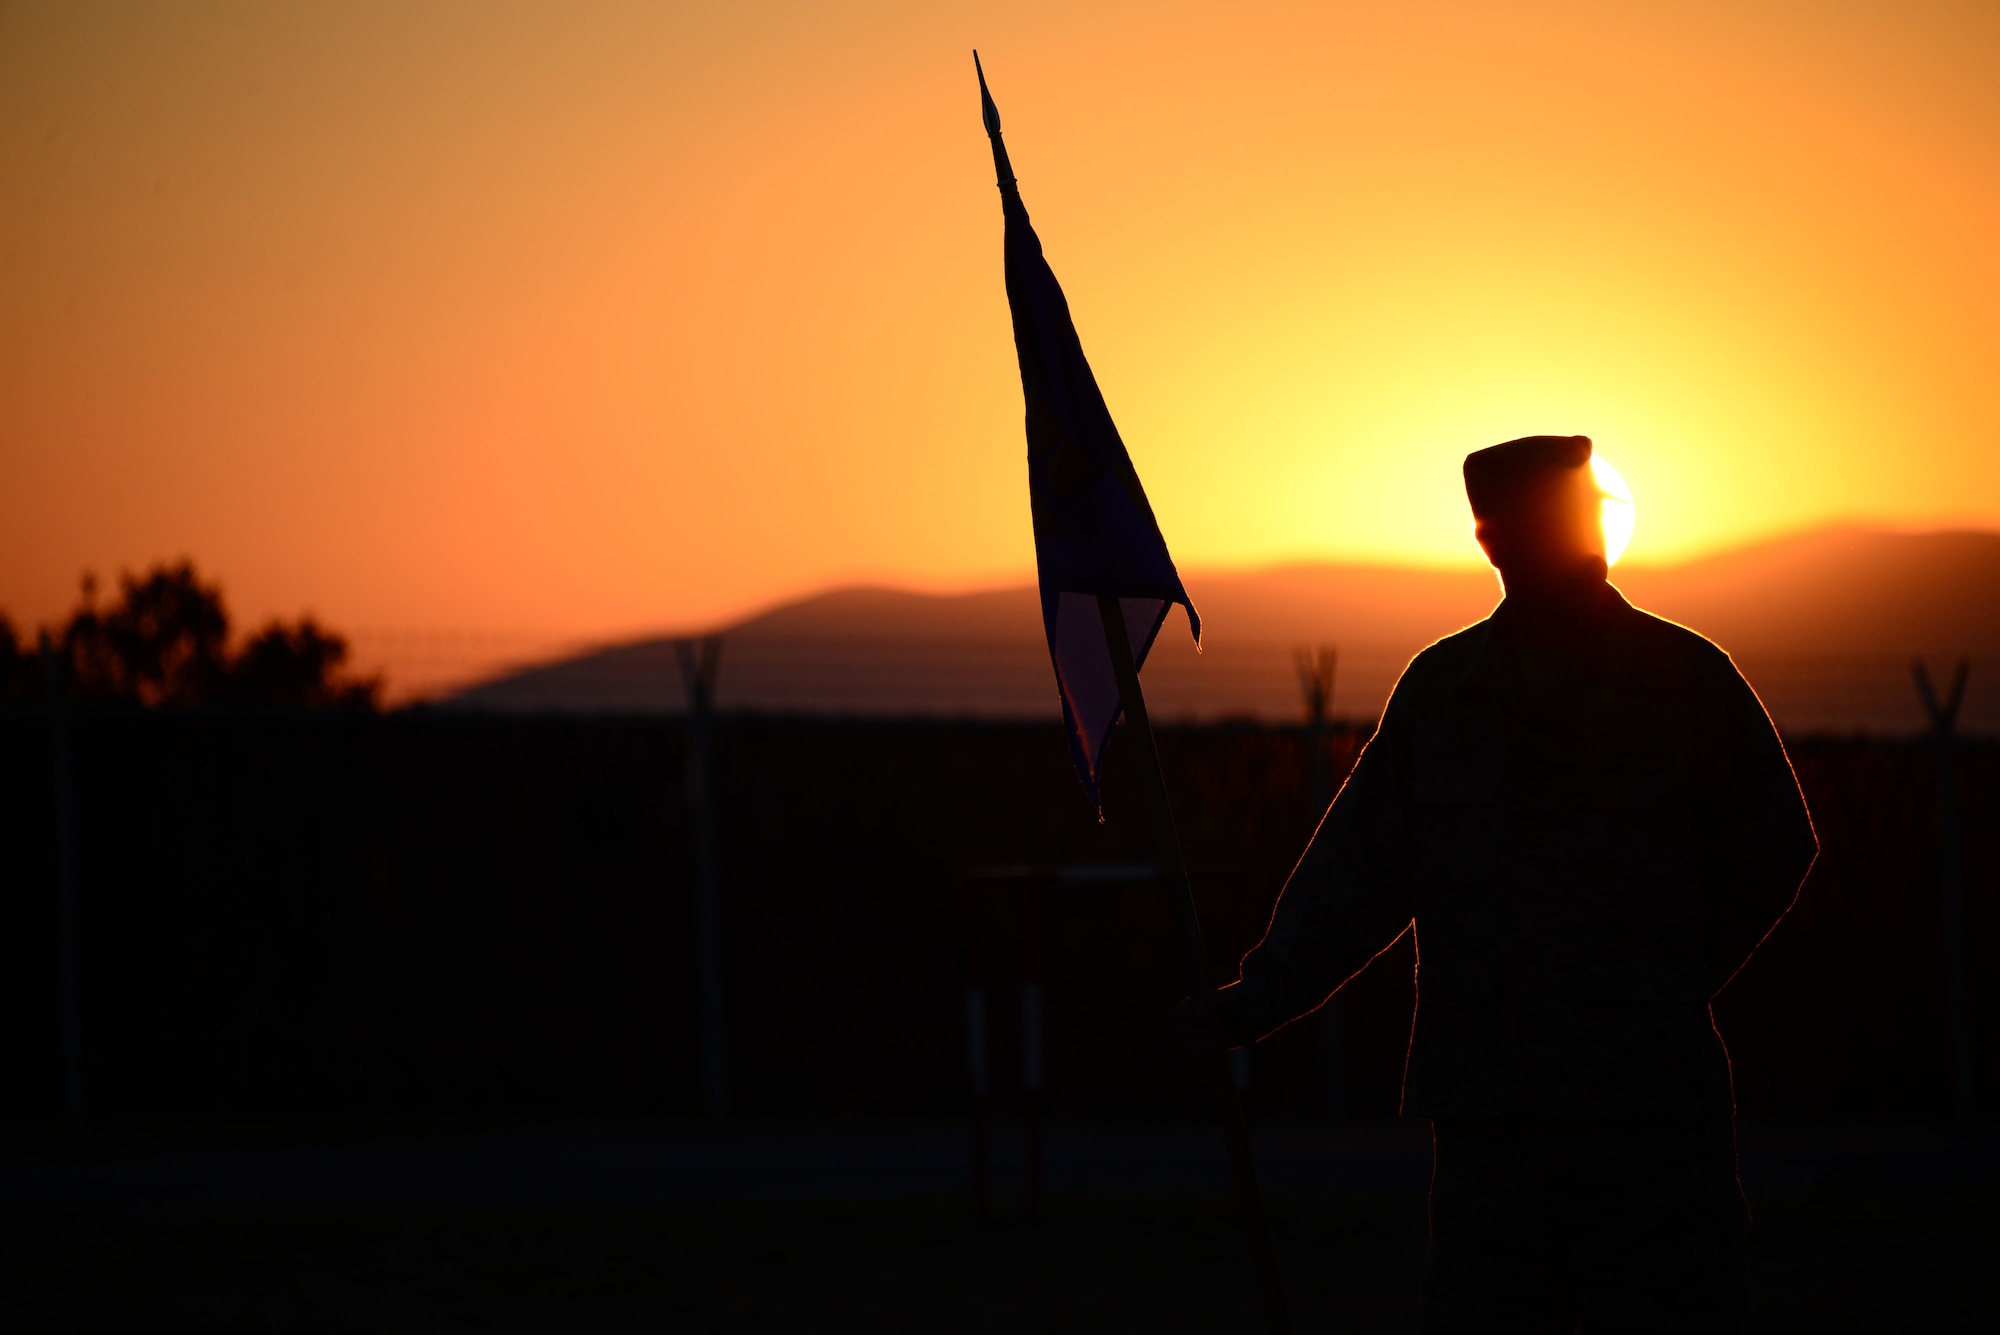 Staff Sgt. Zack Allen, 118th Mission Support Group, Tennessee Air National Guard, stands at parade rest during an early formation Aug. 15, 2016, while deployed to Novo Selo Training Area, Bulgaria.  Tennessee National Guard Soldiers and Airmen were on rotations to complete thier portions of projects as part of Operation Resolute Castle 16, an ongoing operation of military construction to build up Eastern European base infrastructure and help strengthen ties between Tennessee's state partnership with Bulgaria. (U.S. Air National Guard photo by Master Sgt. Kendra M. Owenby, 134 ARW Public Affairs)